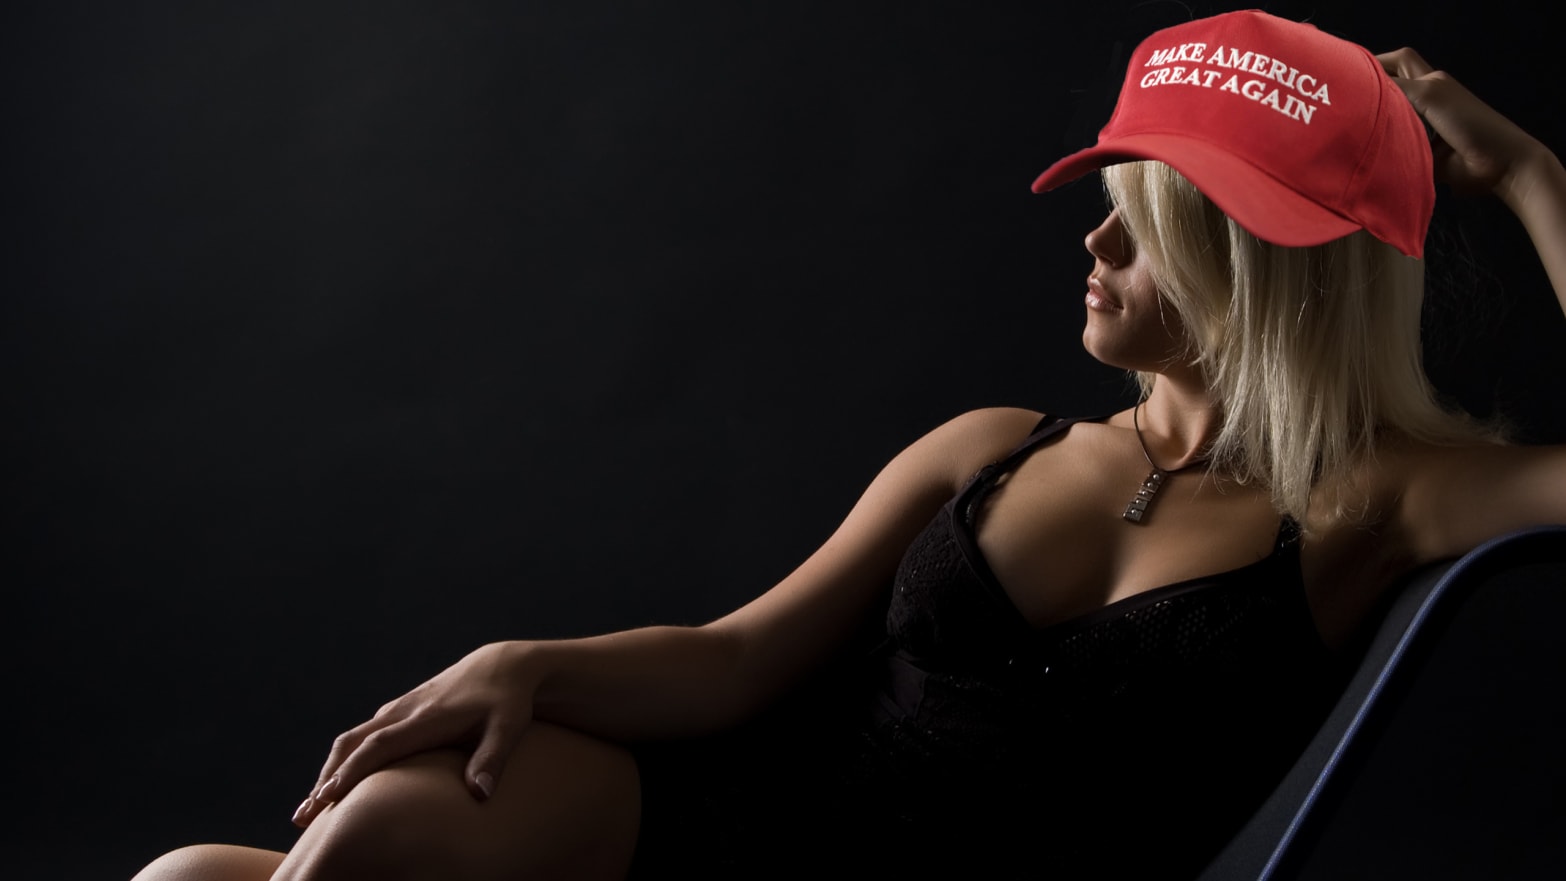 Politician Porn Star - Pro-Trump Porn Stars Are Scared Silent: 'The Industry Is ...